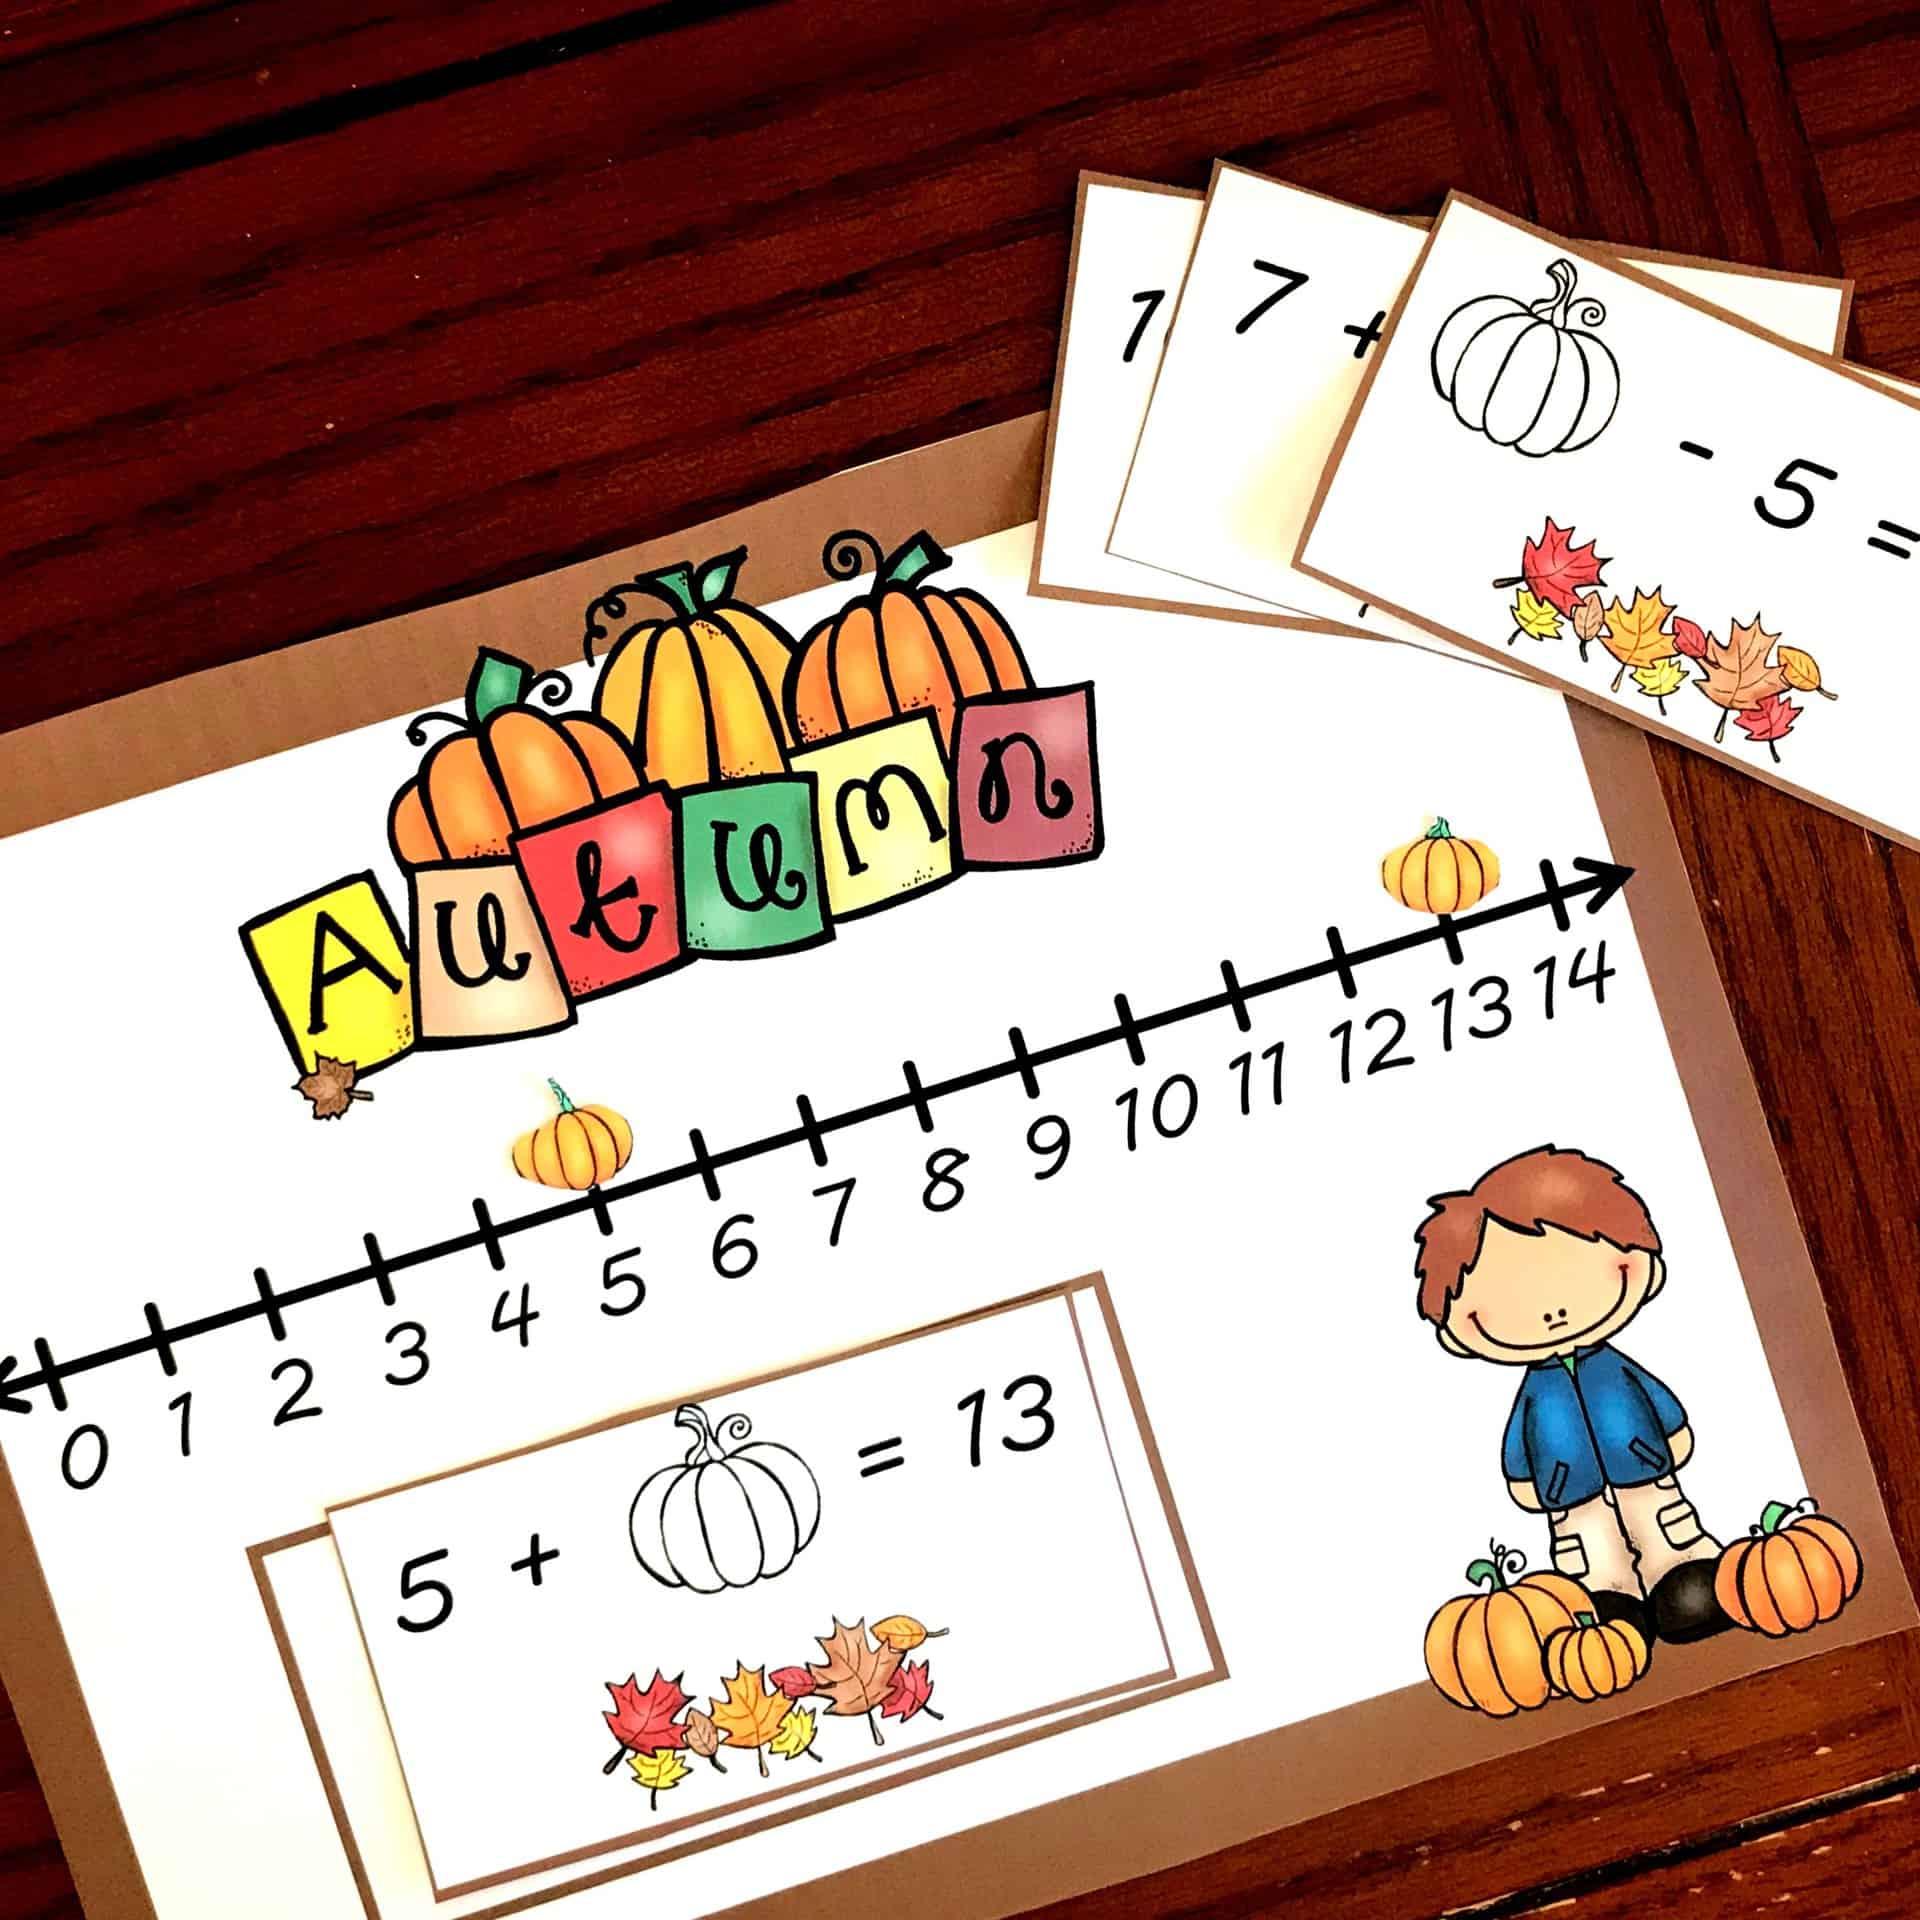 Fill in the Missing Number using a Number Line | Free Printable